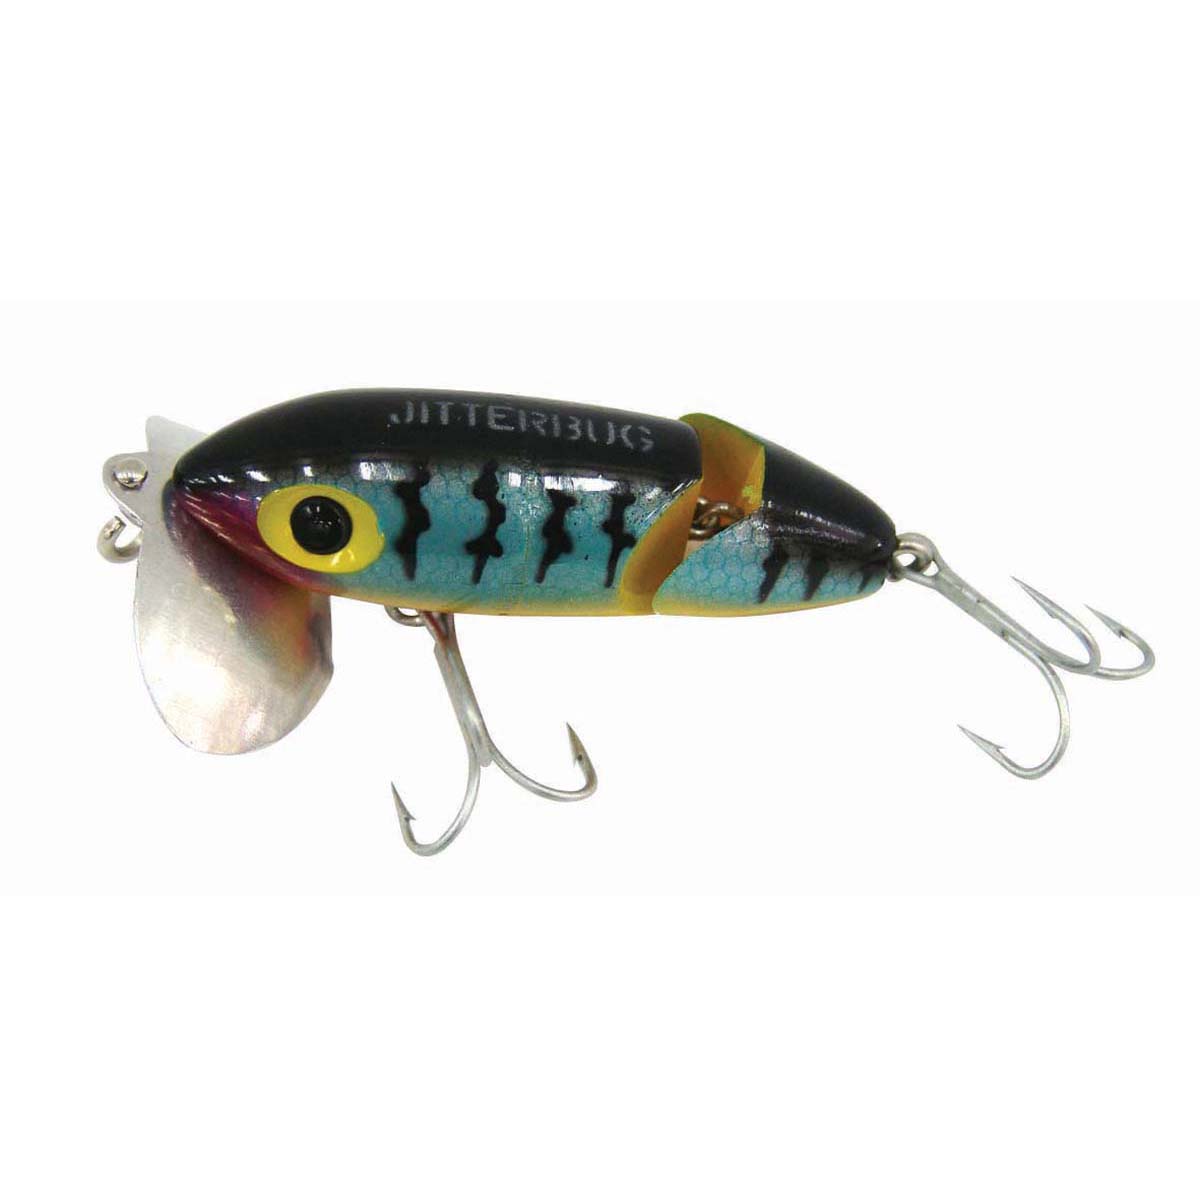 Arbogast Jitterbug Jointed Surface Lure 6.35cm Perch